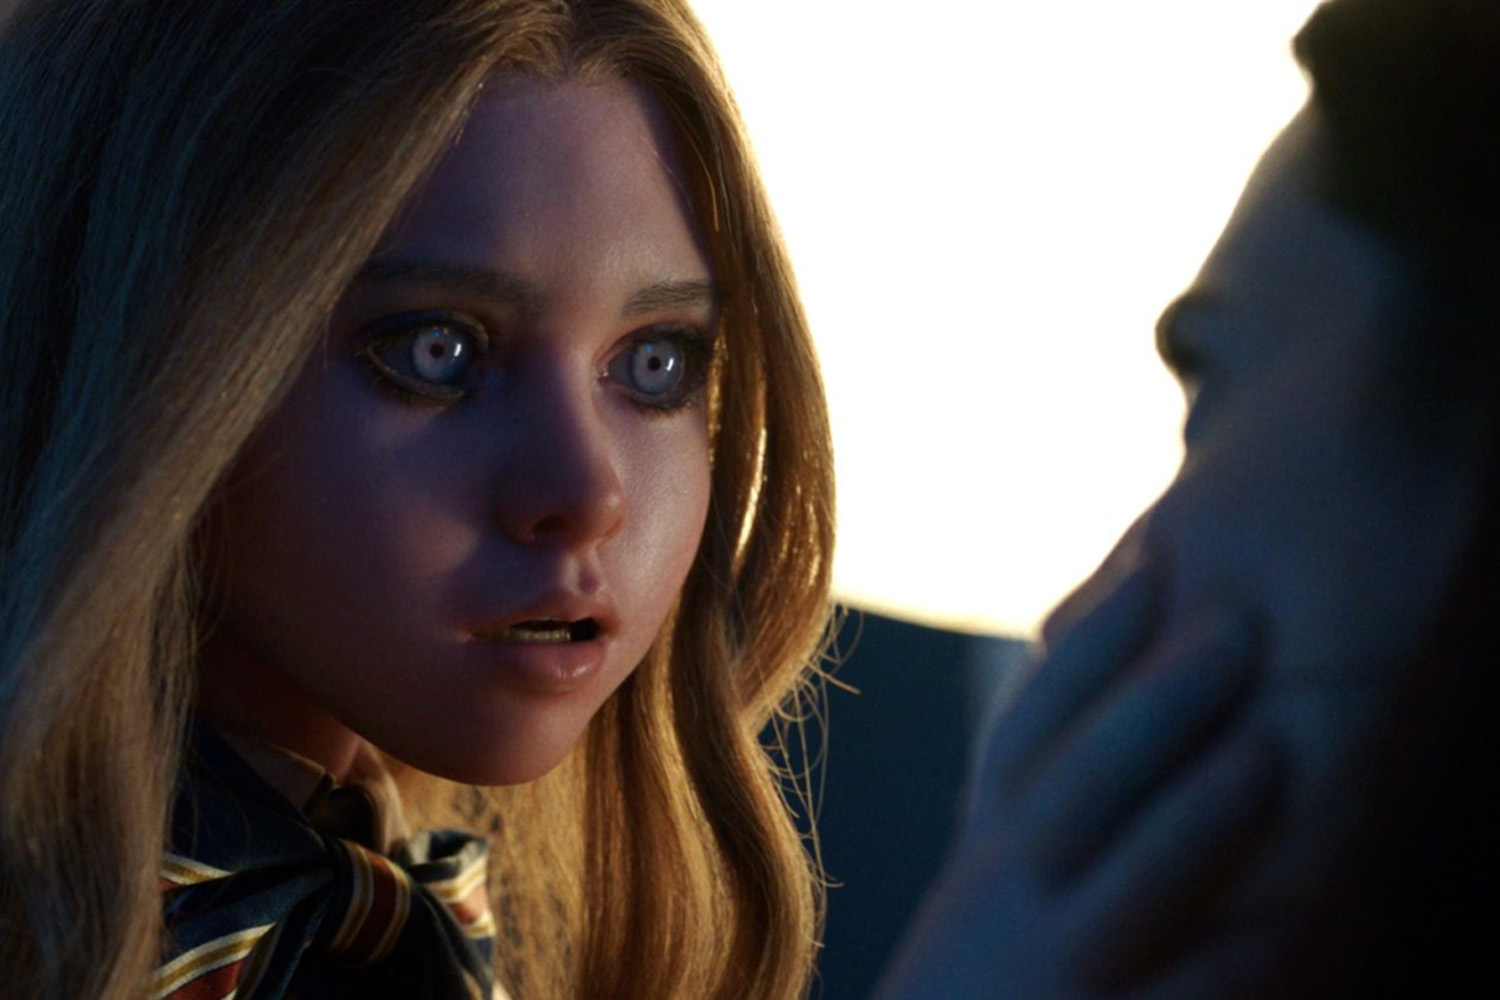 Game Review: 'Until Dawn' adds clever twists to teen horror genre